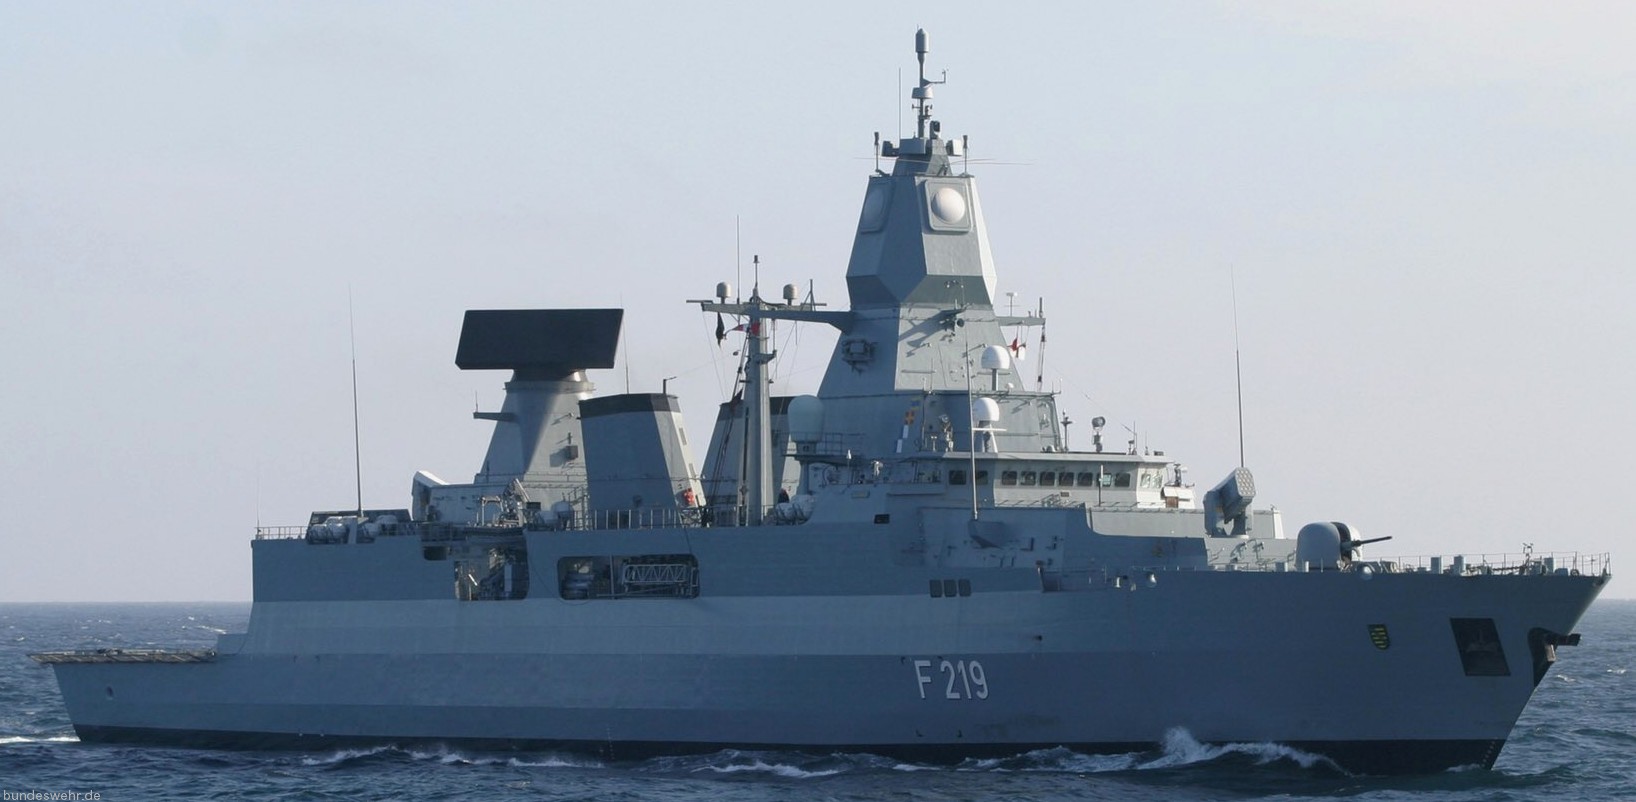 f-219 fgs sachsen type 124 class guided missile frigate ffg german navy marine fregatte 31